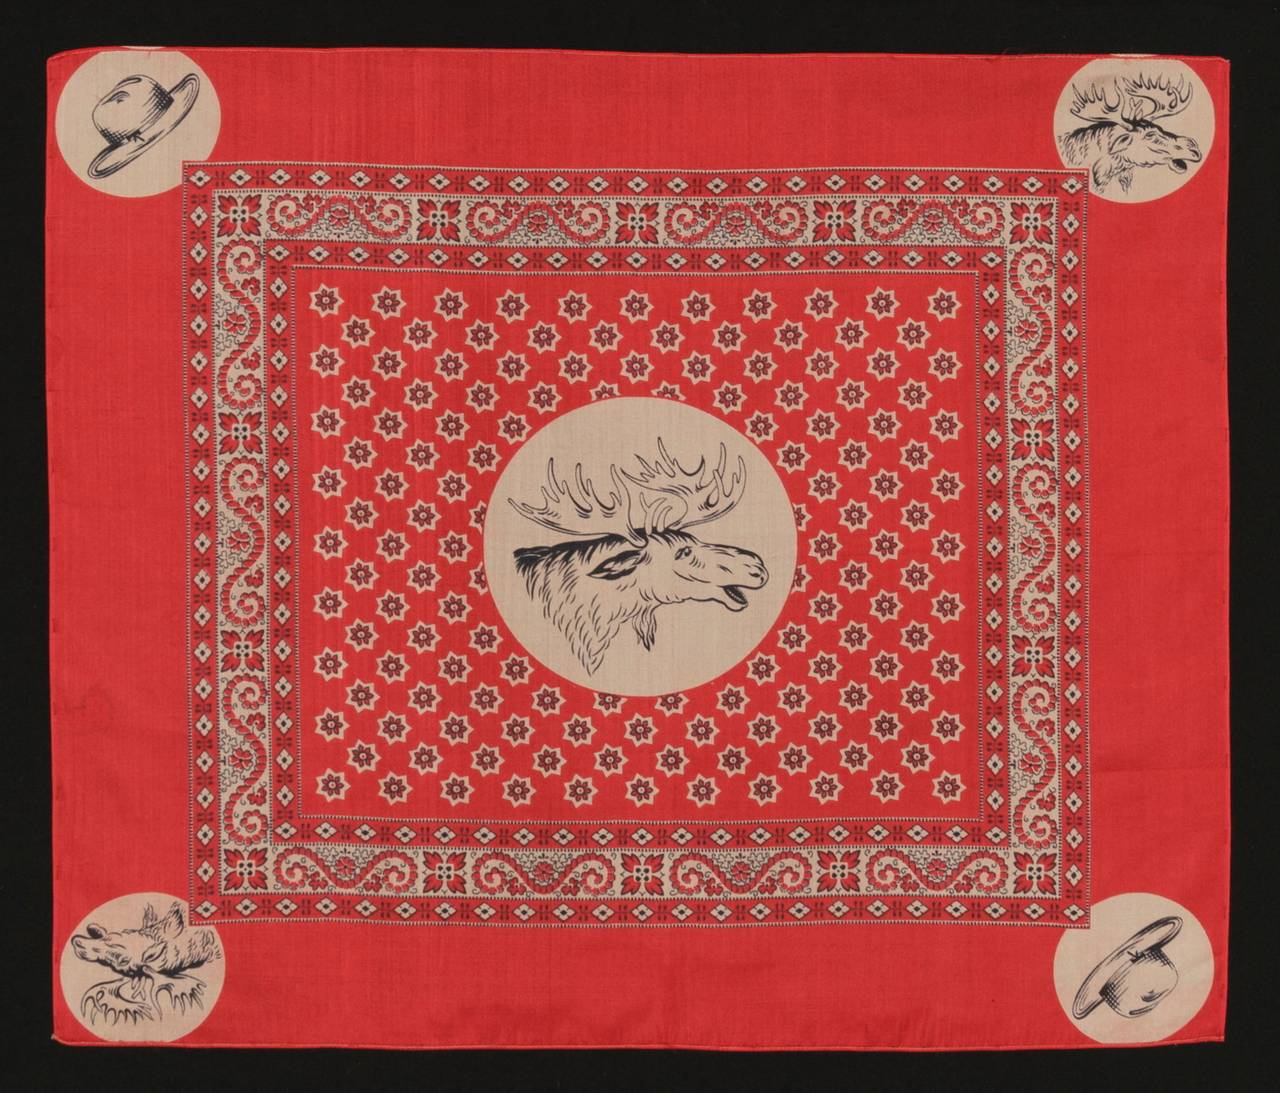 SILK CAMPAIGN KERCHIEF FEATURING A PROMINENT BULL MOOSE, MADE FOR THE 1912 PRESIDENTIAL RUN OF TEDDY ROOSEVELT, WHEN HE RAN ON THE NATIONAL PROGRESSIVE PARTY TICKET:

 Printed silk kerchief, made for the 1912 presidential campaign of Theodore